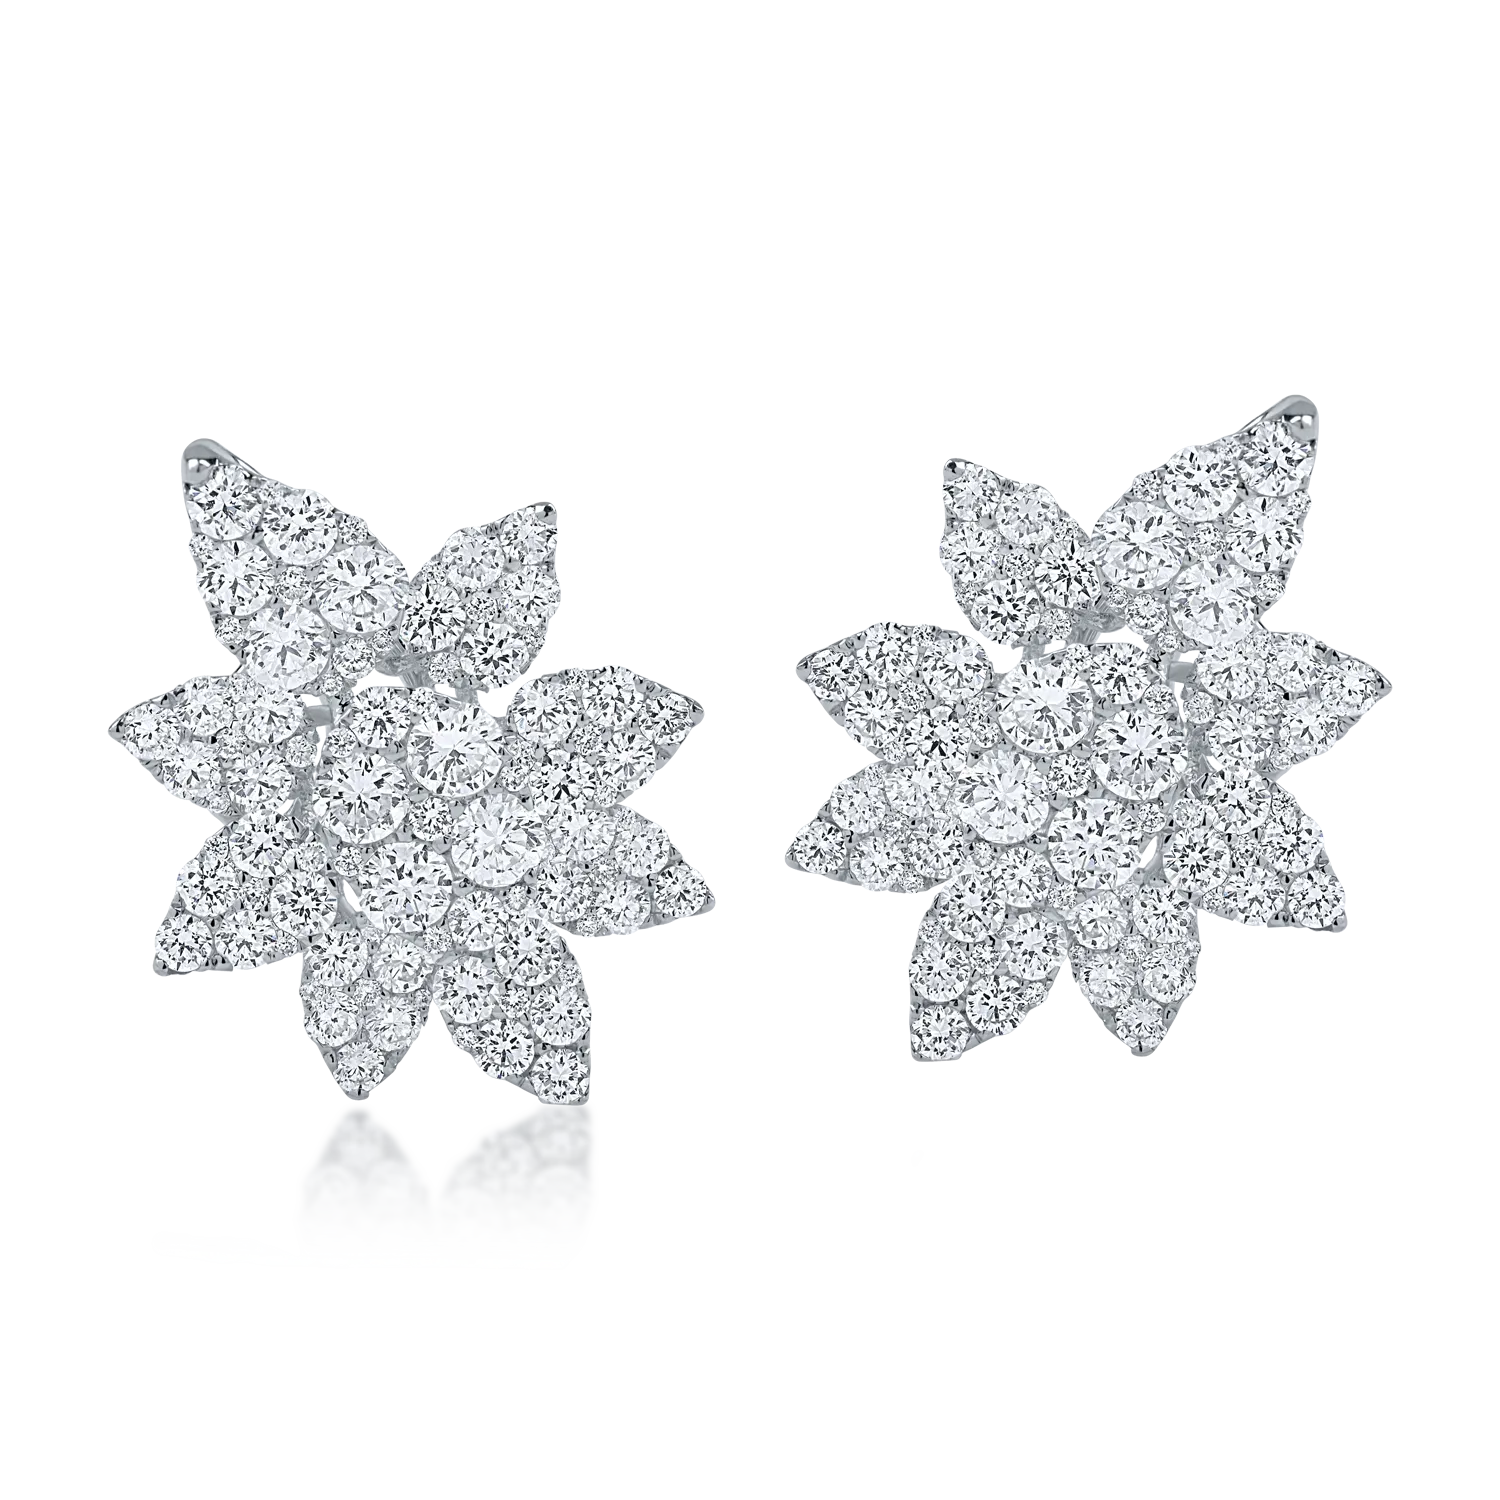 White gold earrings with 2.25ct diamonds